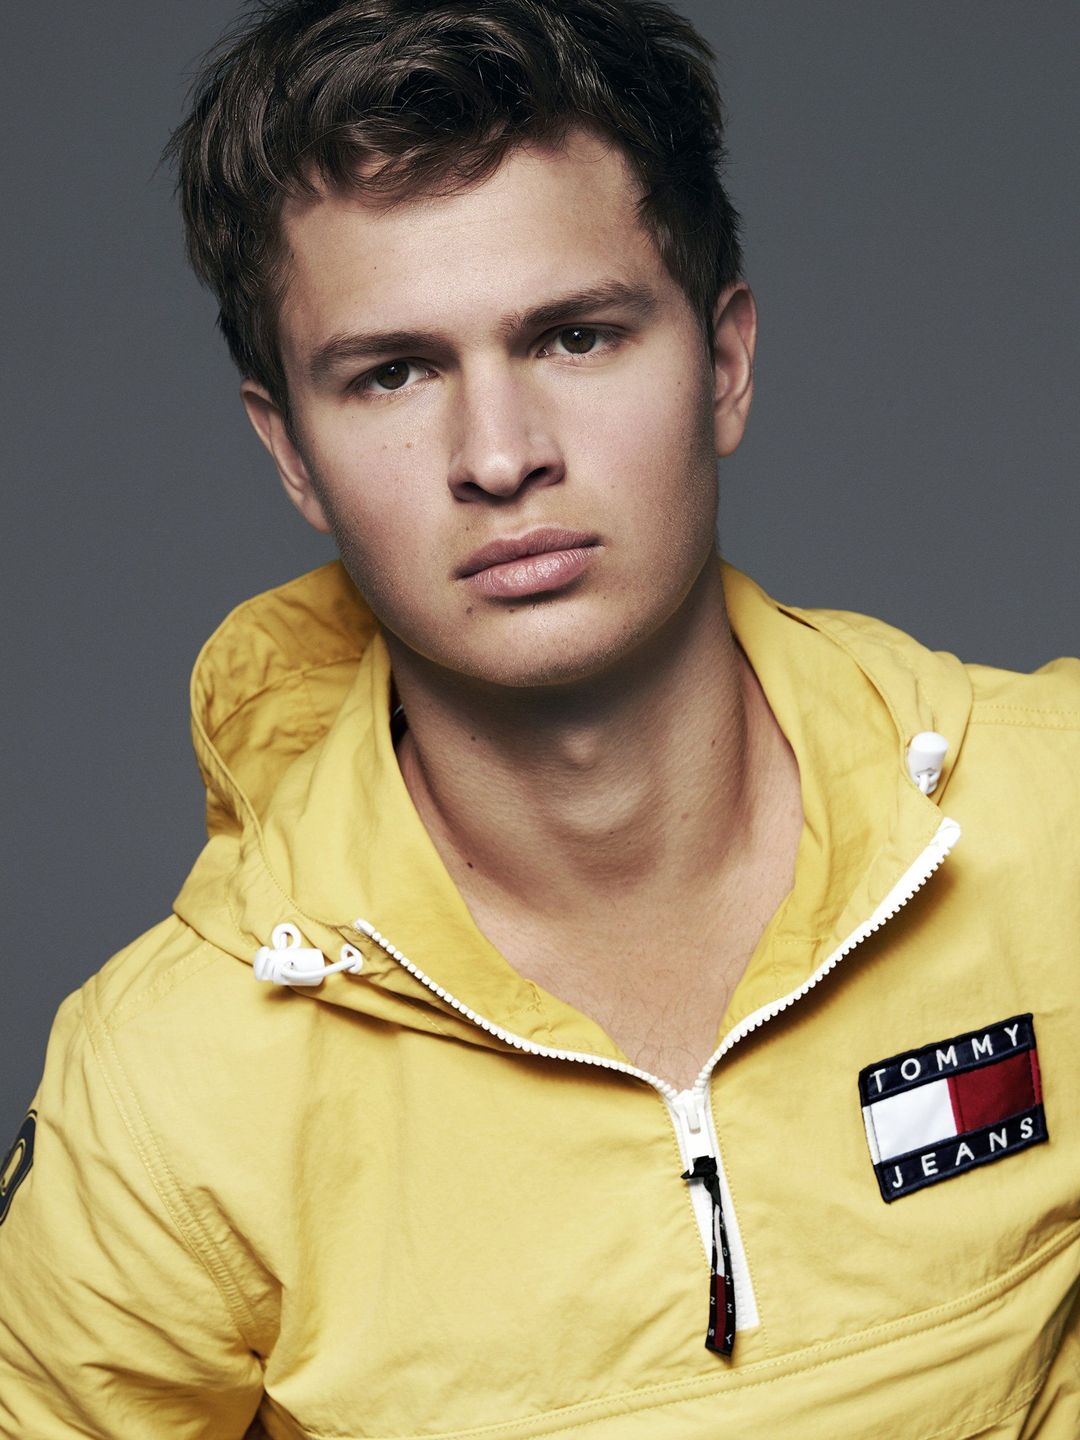 Ansel Elgort where is he now